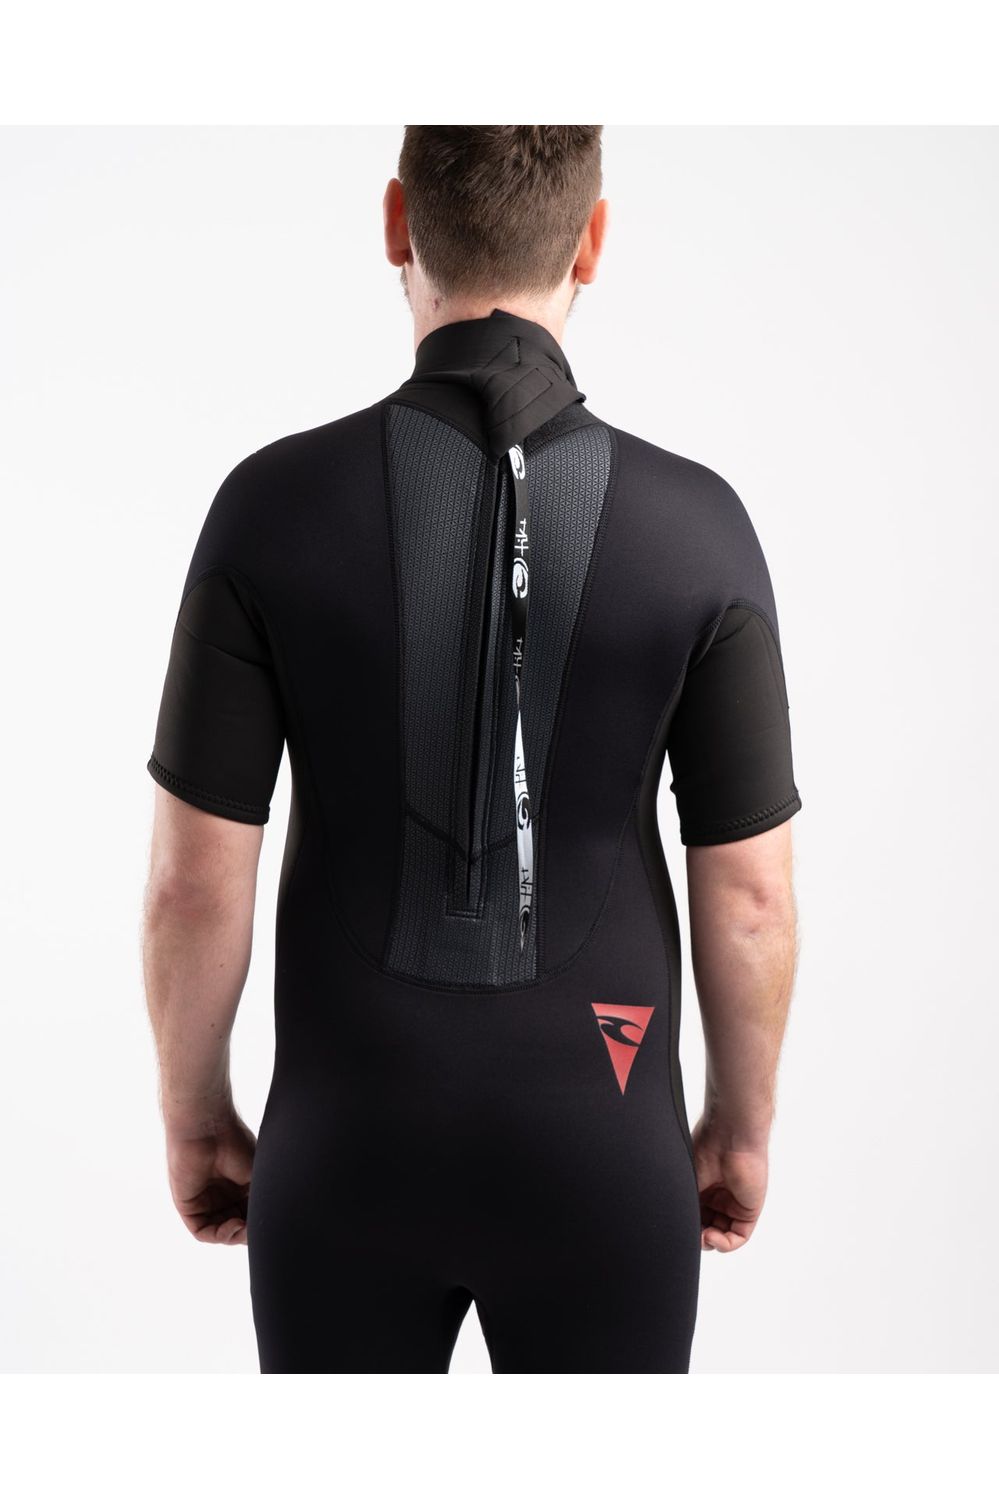 Tiki Tech 3/2 Spring Wetsuit with Back Zip - Black & Red